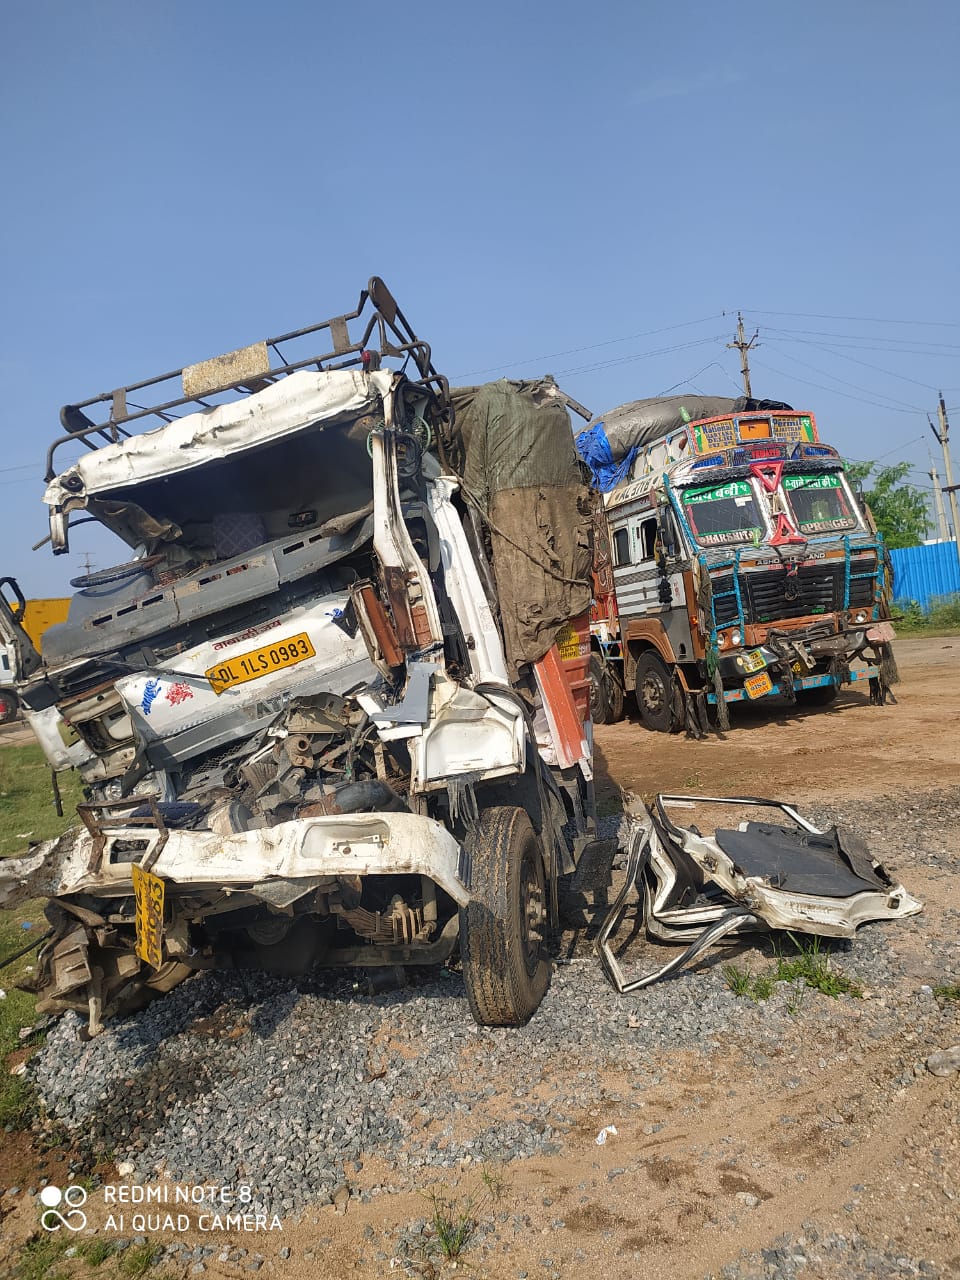 चिरुला थाना क्षेत्र के आरटीओ बैरियर पर हादसा  Truck collided with rear in container, driver seriously injured, news in hindi, mp news, datia news